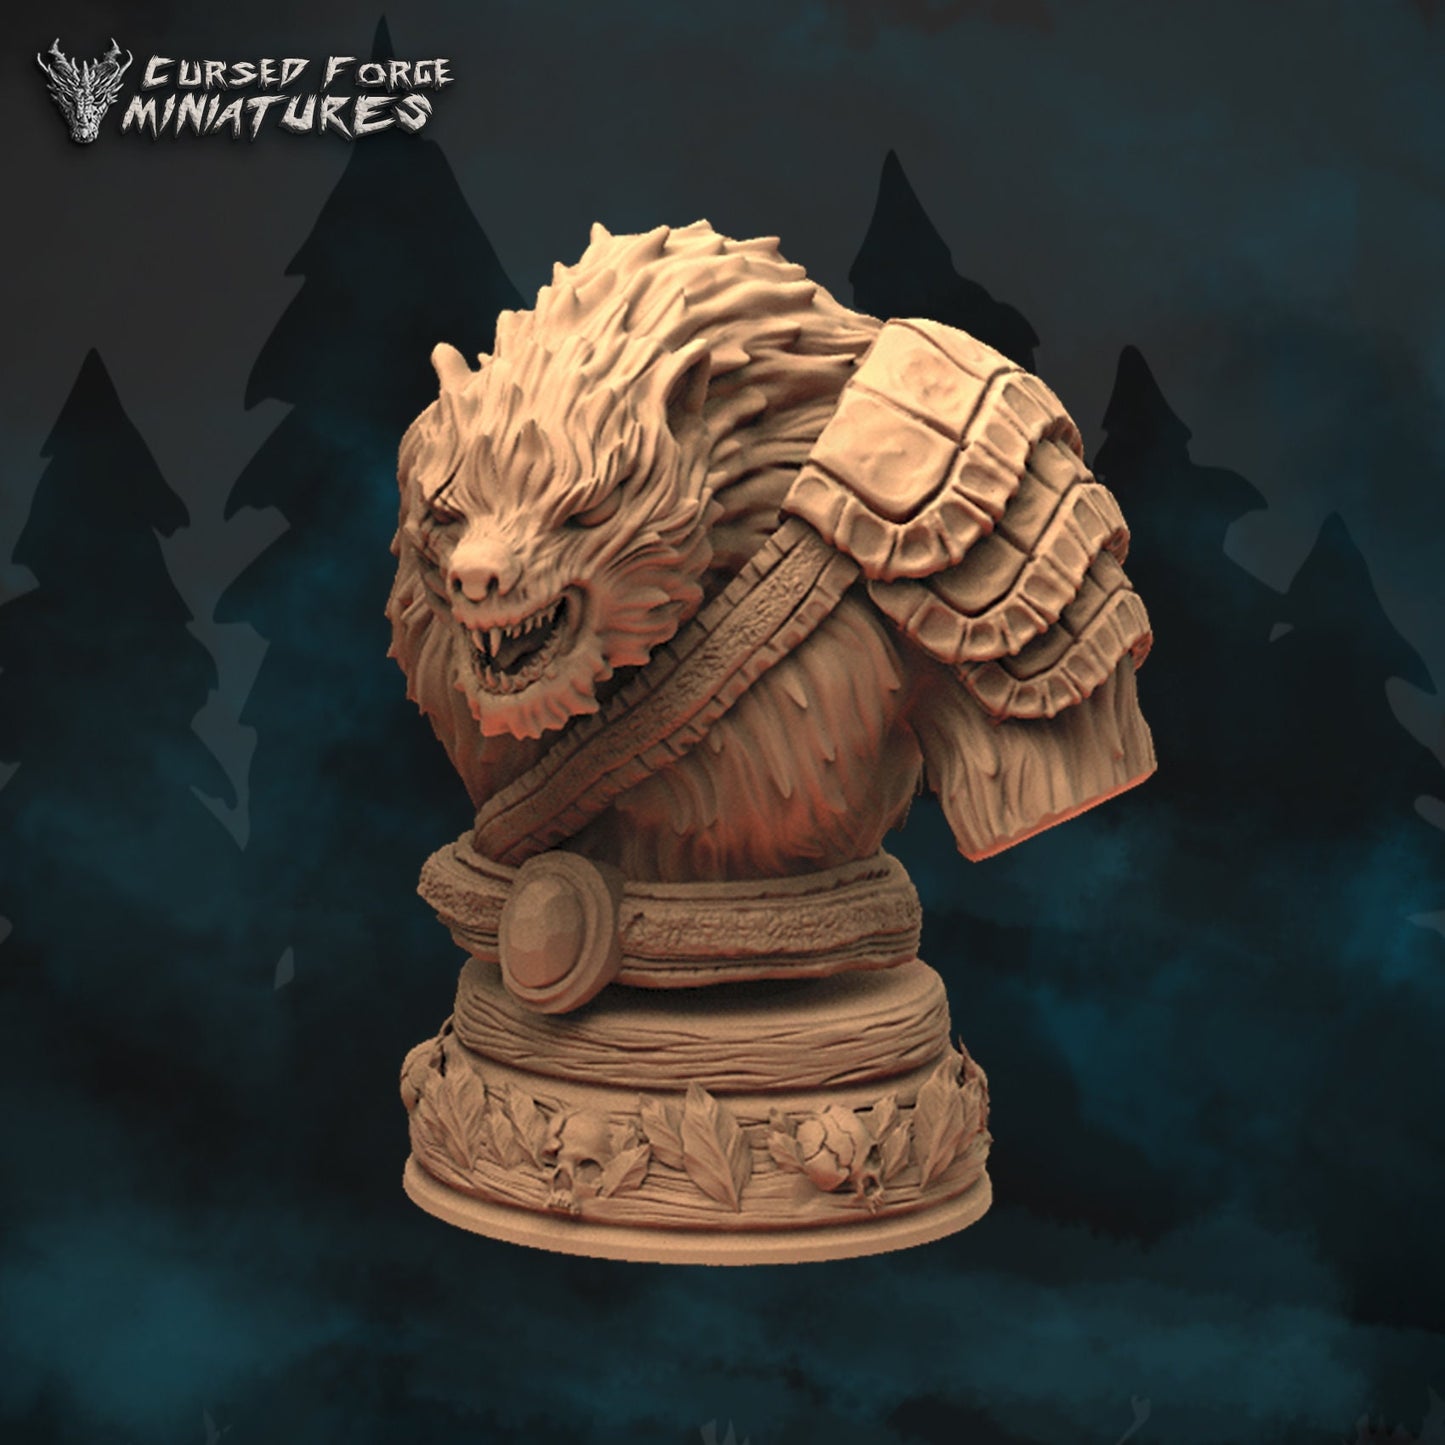 WEREBEAR BUST, by Cursed Forge Miniatures // 3D Print on Demand / D&D / Pathfinder / RPG